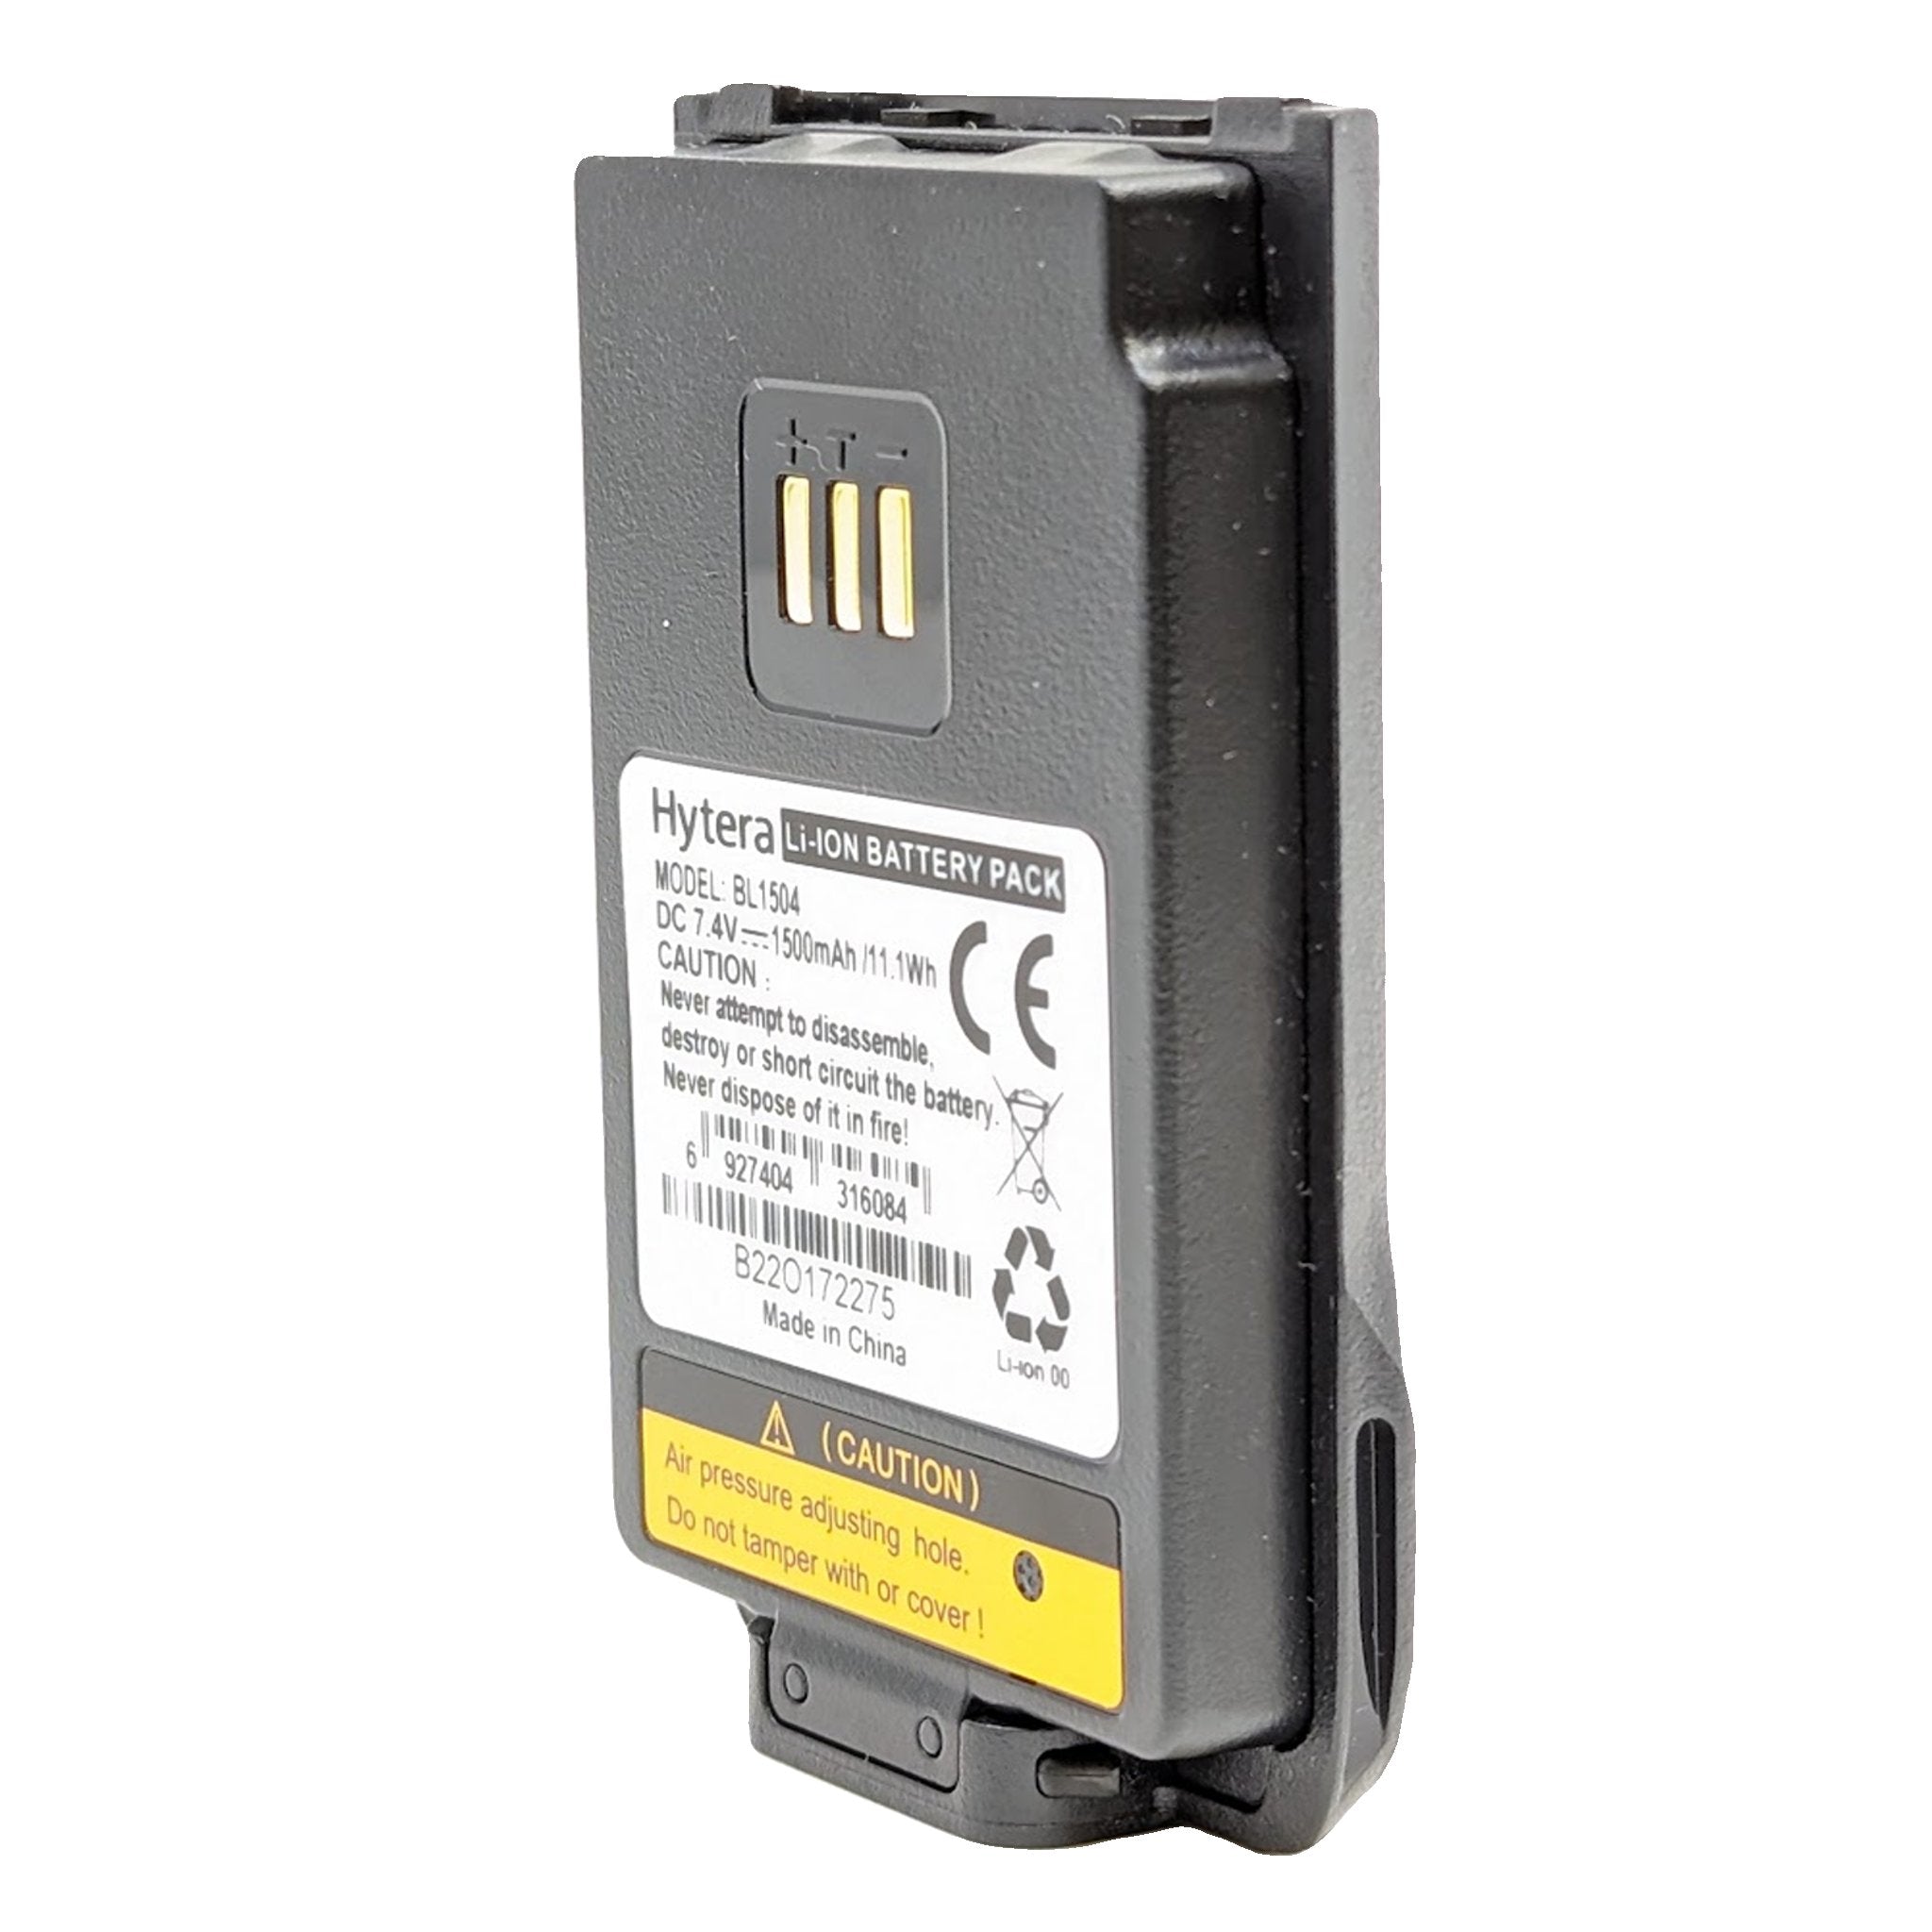 Hytera BL1504 Battery for Hytera Portable Two Way Radio - Lithium Ion (1500mAh)